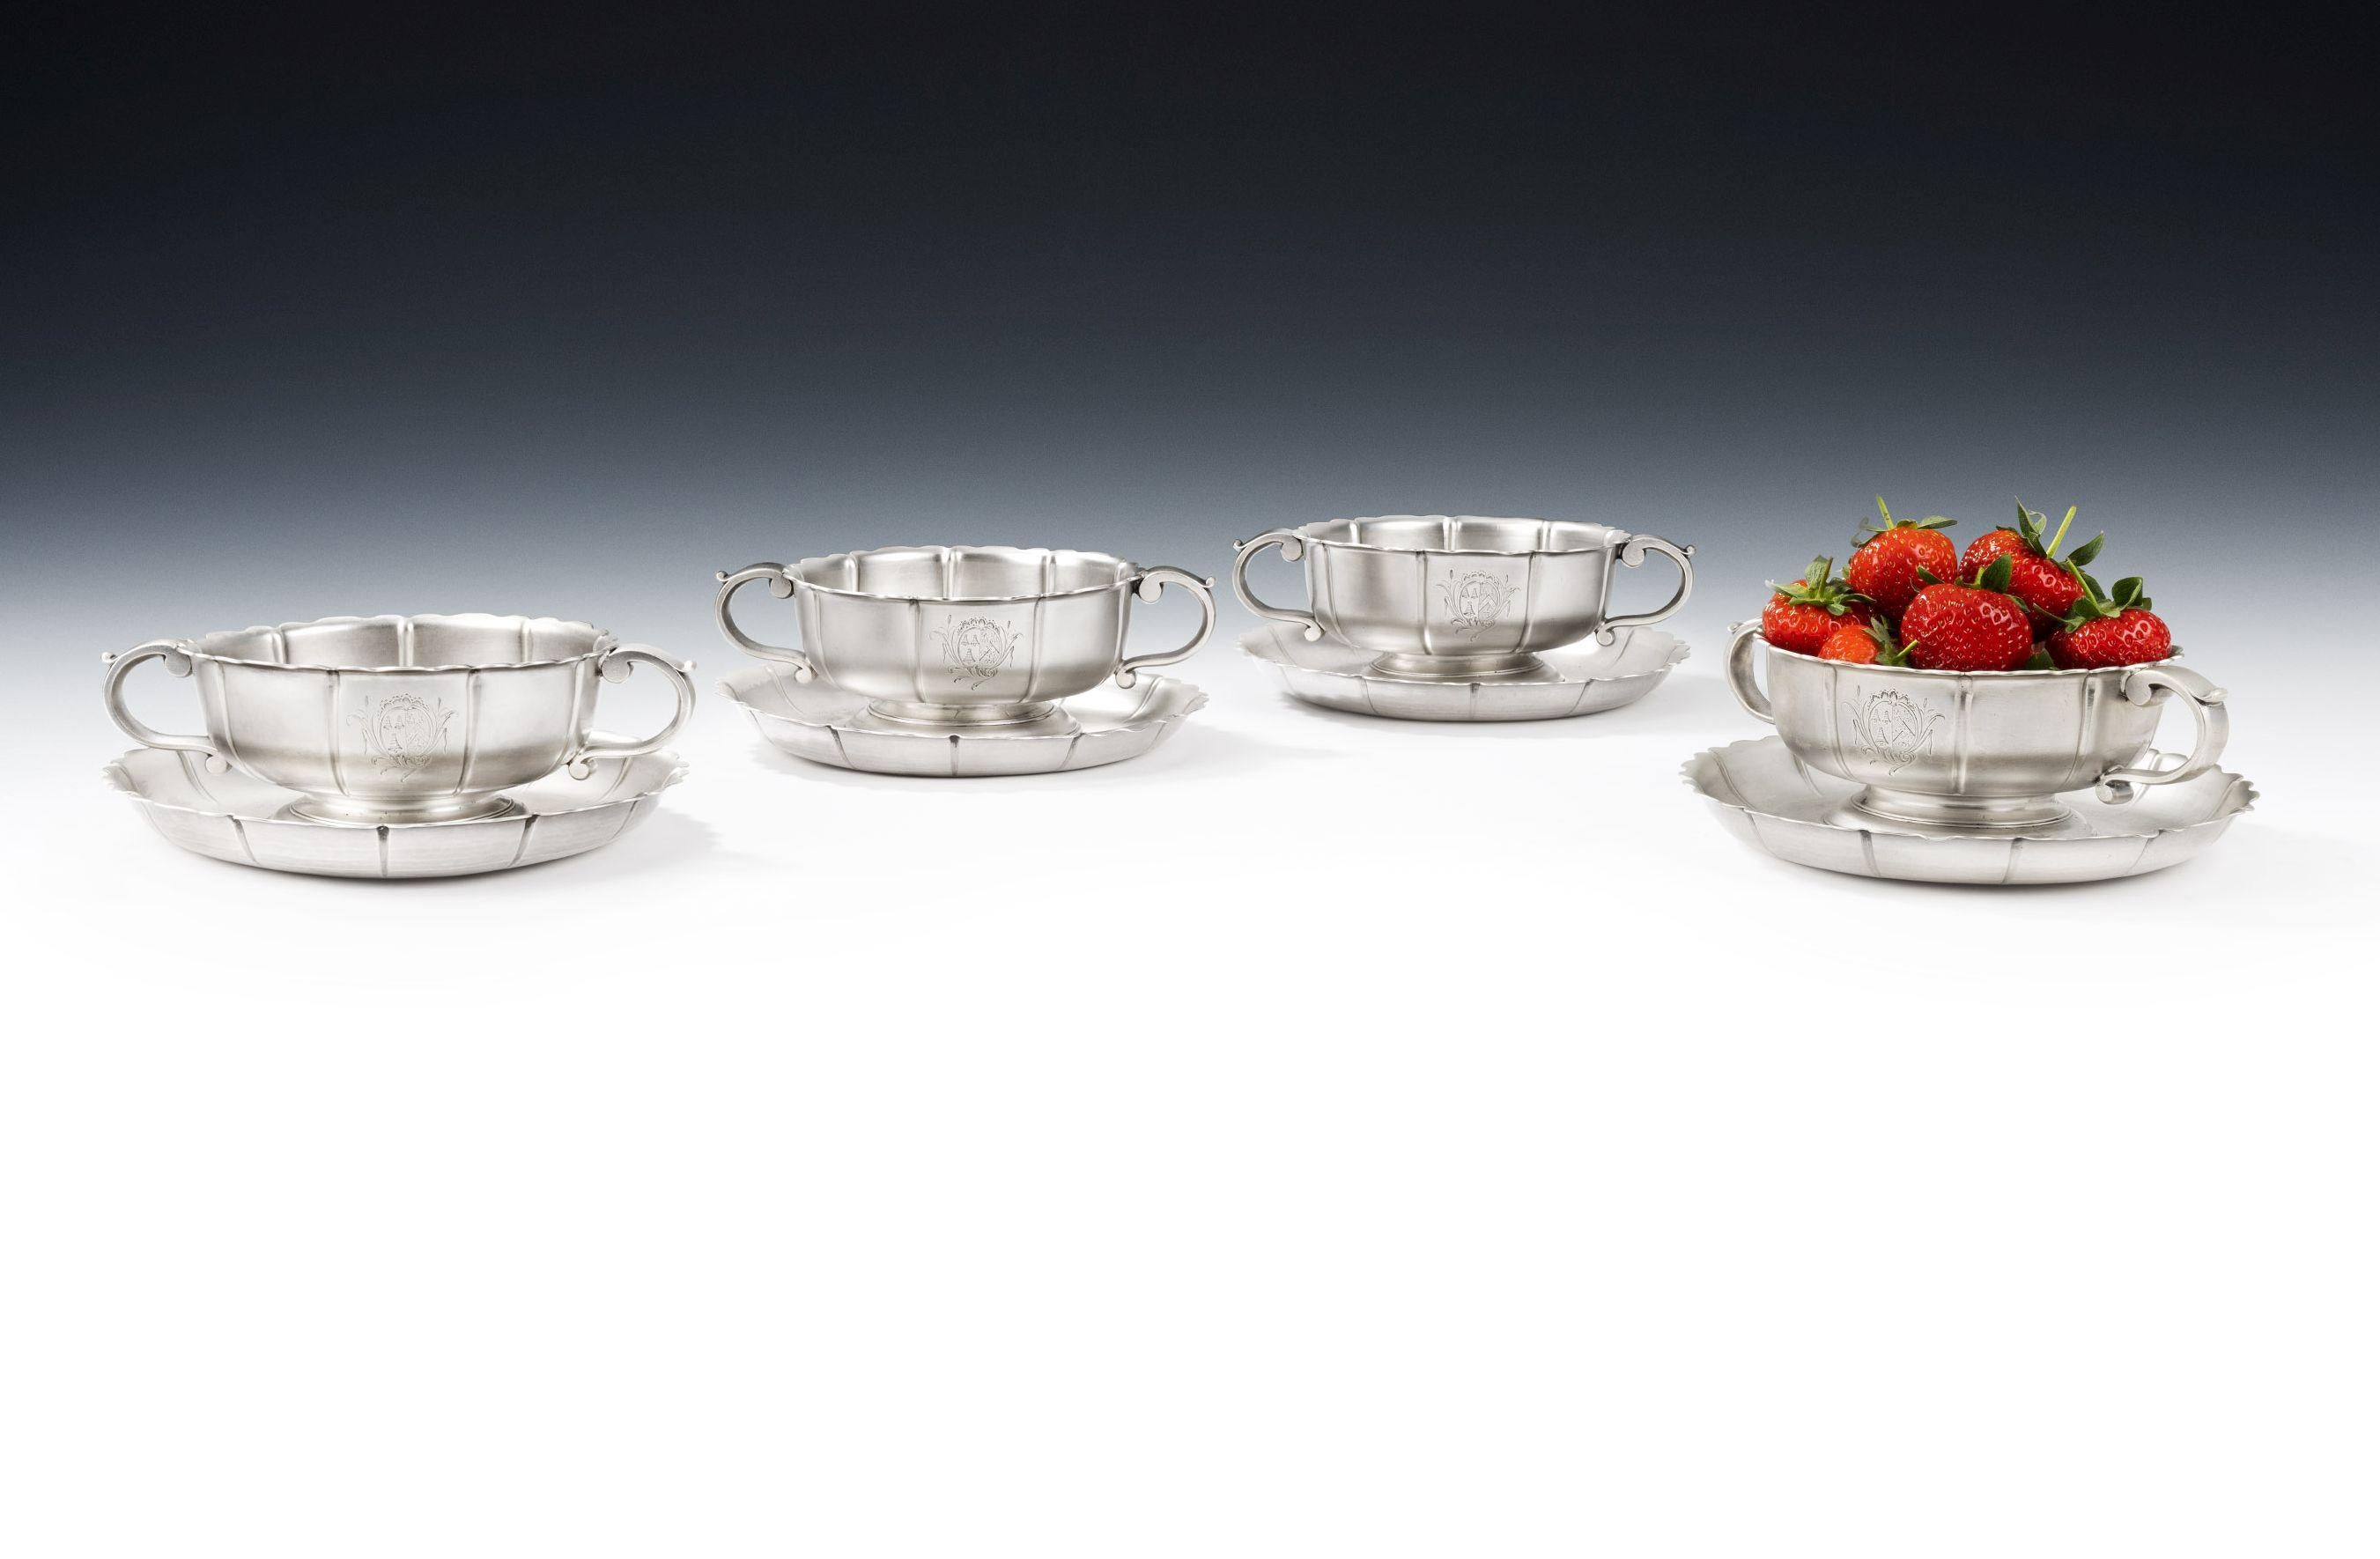 Silver Set of 4 George II Fruit Bowls & Stands Made in London by Samuel Herbert & Co.